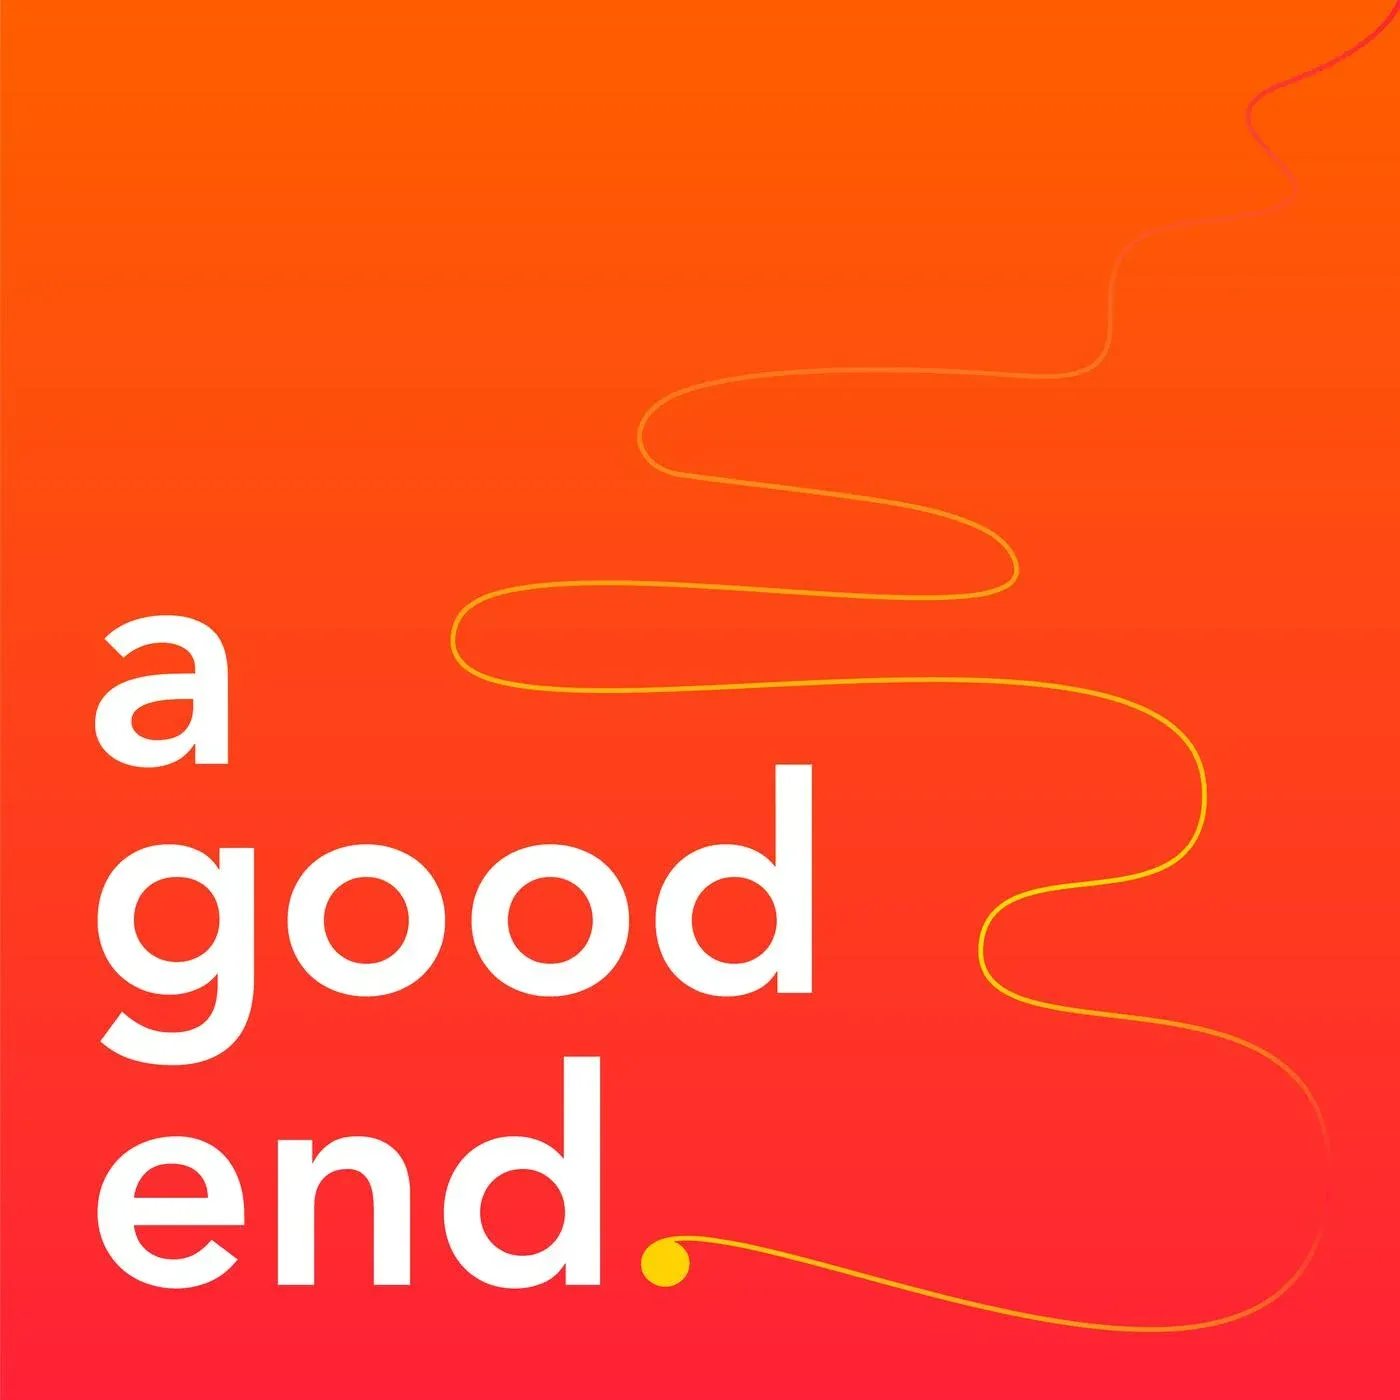 A good end written on a red and orange background with a simple line drawing of a path